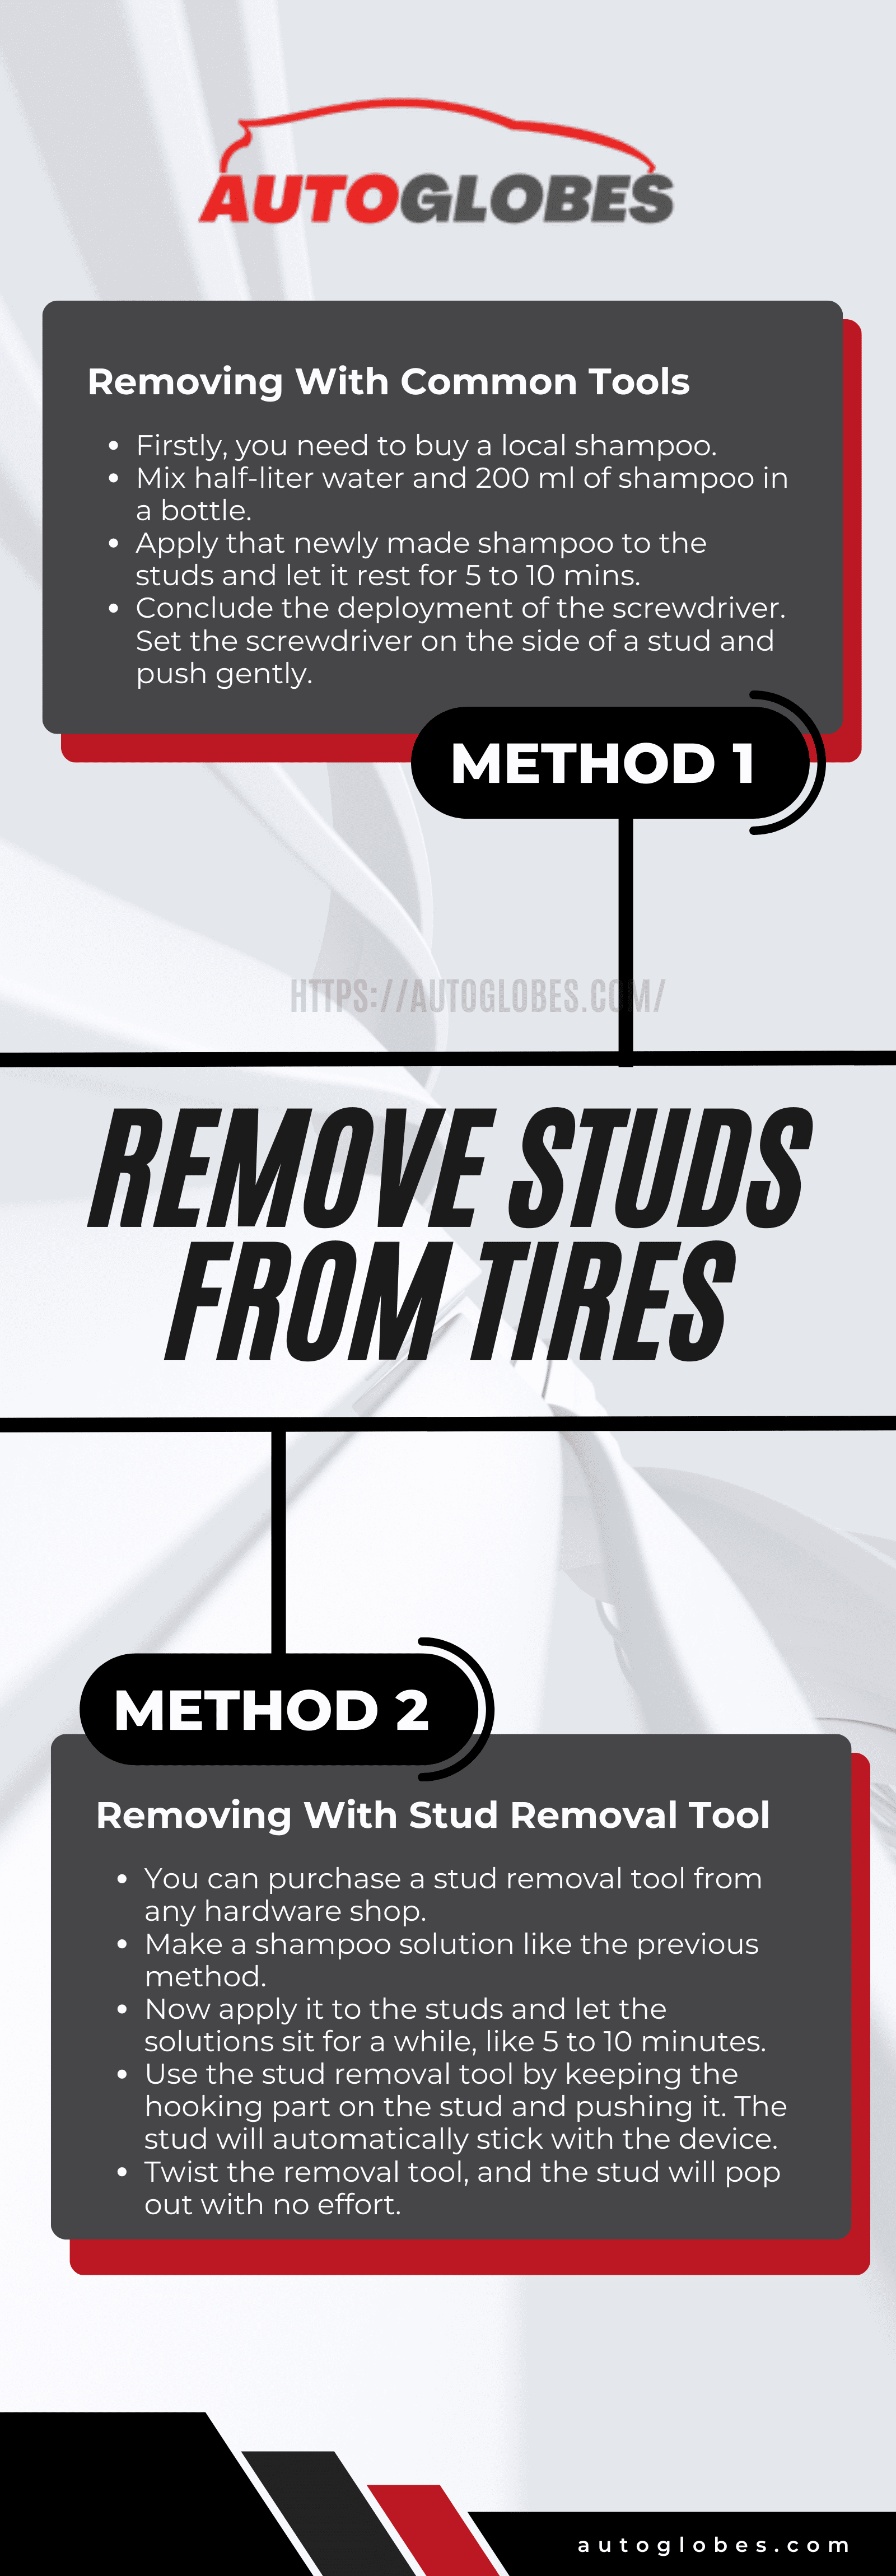 Remove Studs From Tires Infographic